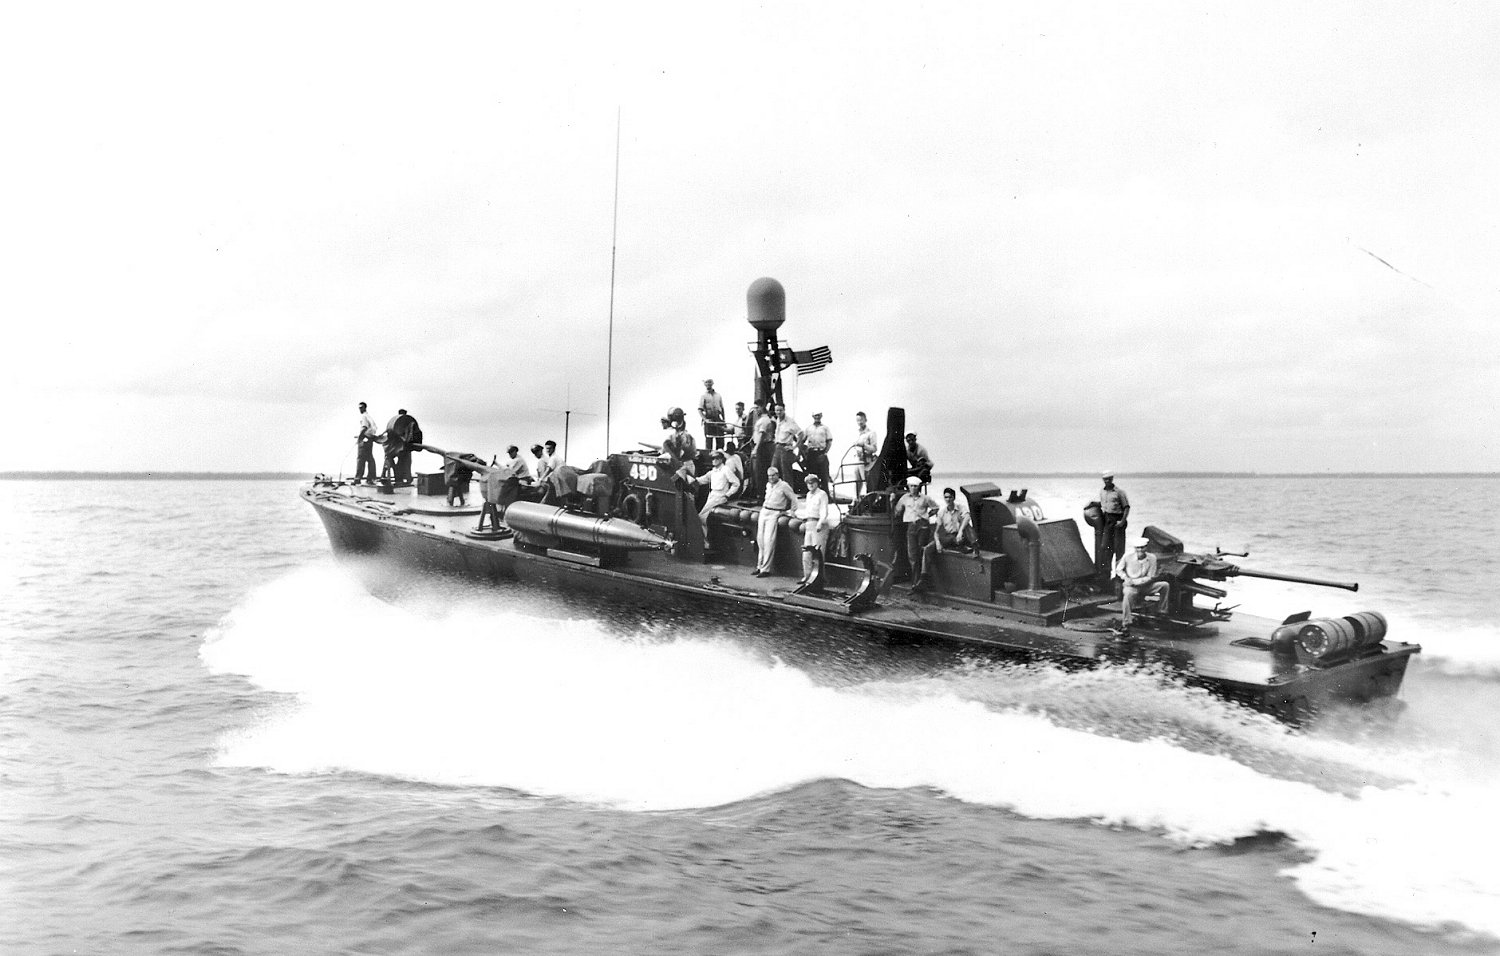 PT-490, an 80-foot Elco motor torpedo boat with MTB Squadron 33, transporting Gen Douglas MacArthur, LGen Robert Eichelberger, and staff from Iloilo on Panay to Bacolod on Negros in the Philippines, 7 Jun 1945.